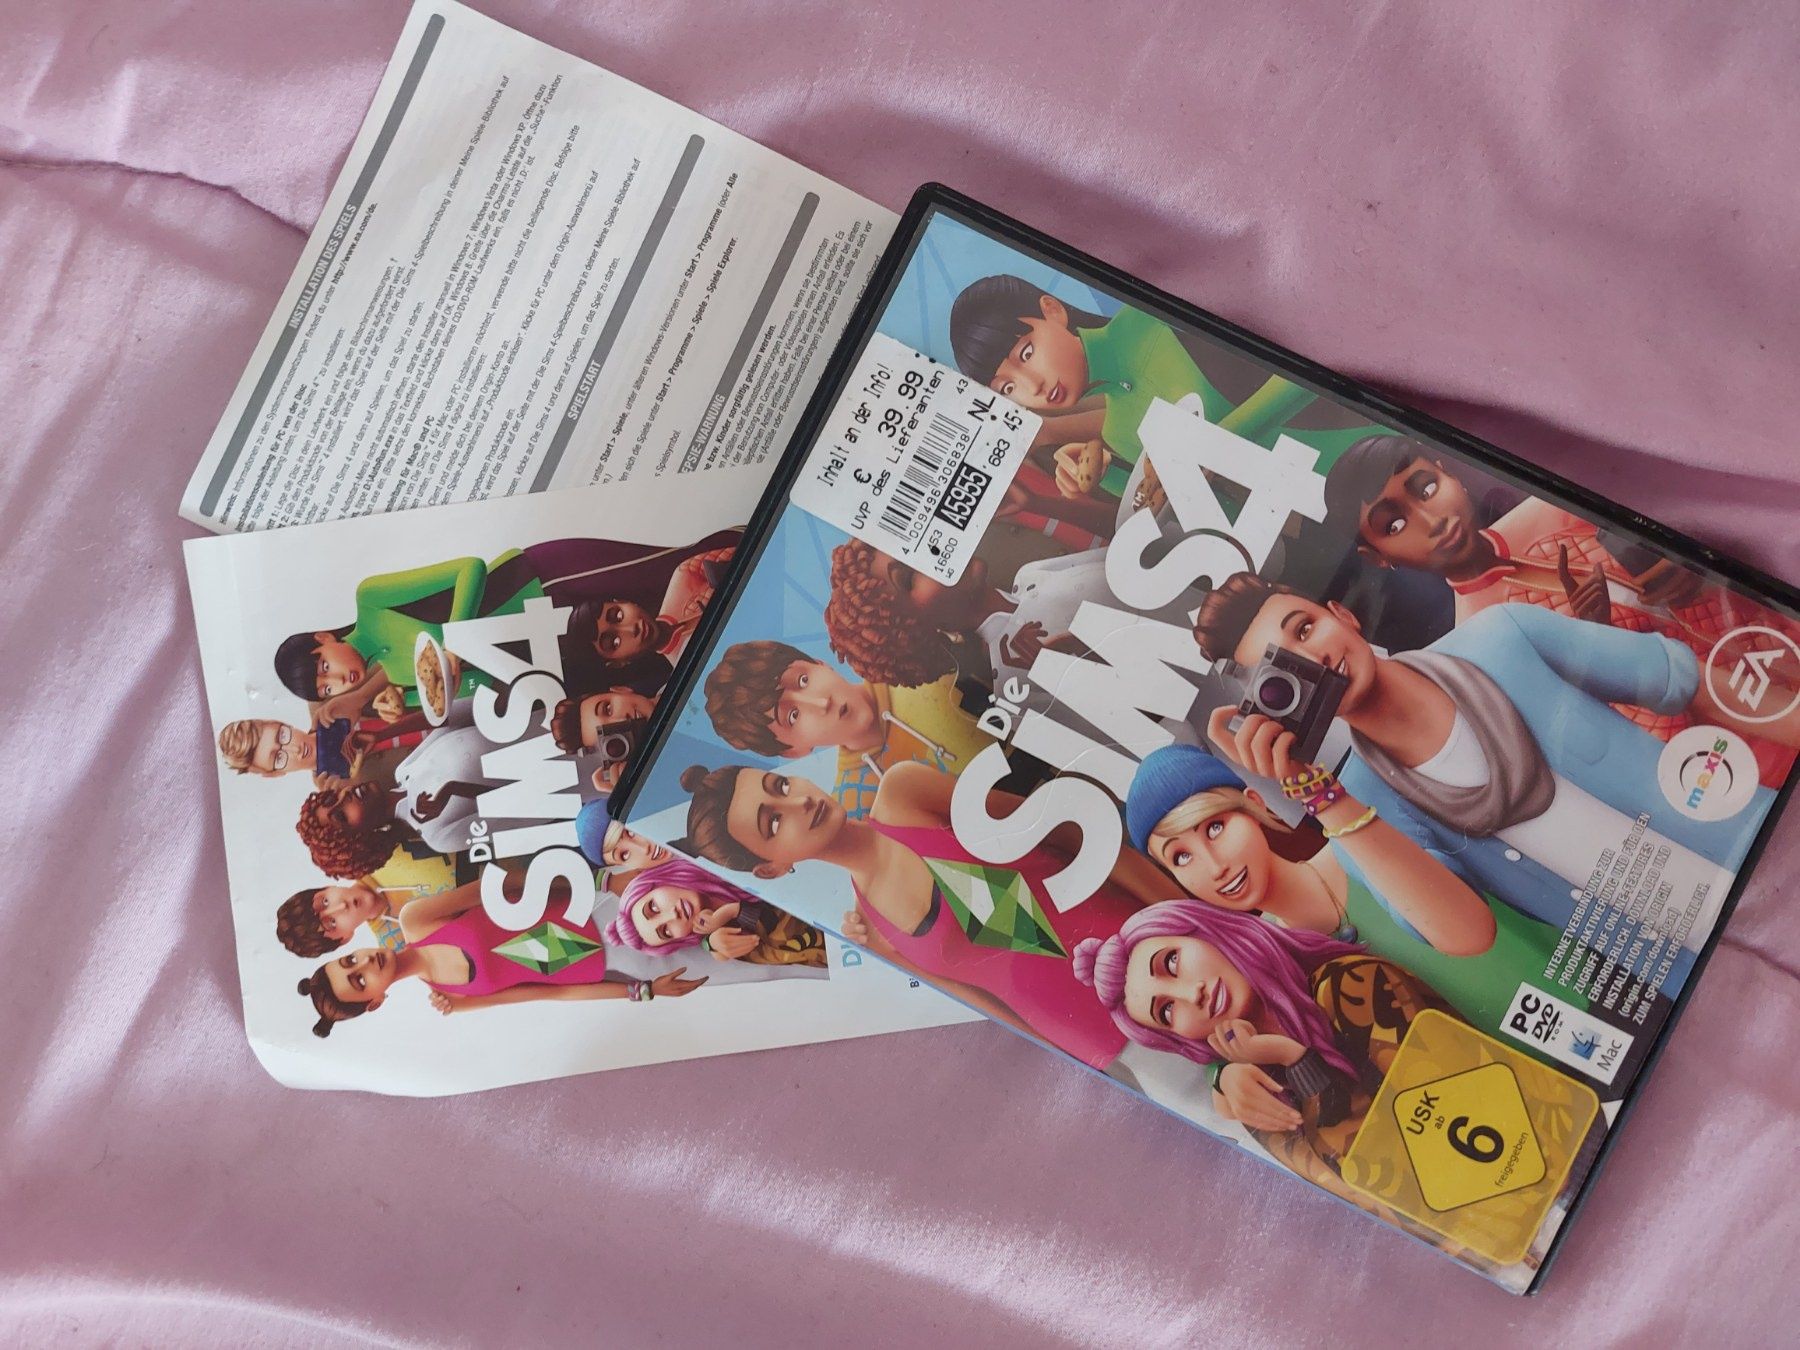 The sims 4 pc dvd